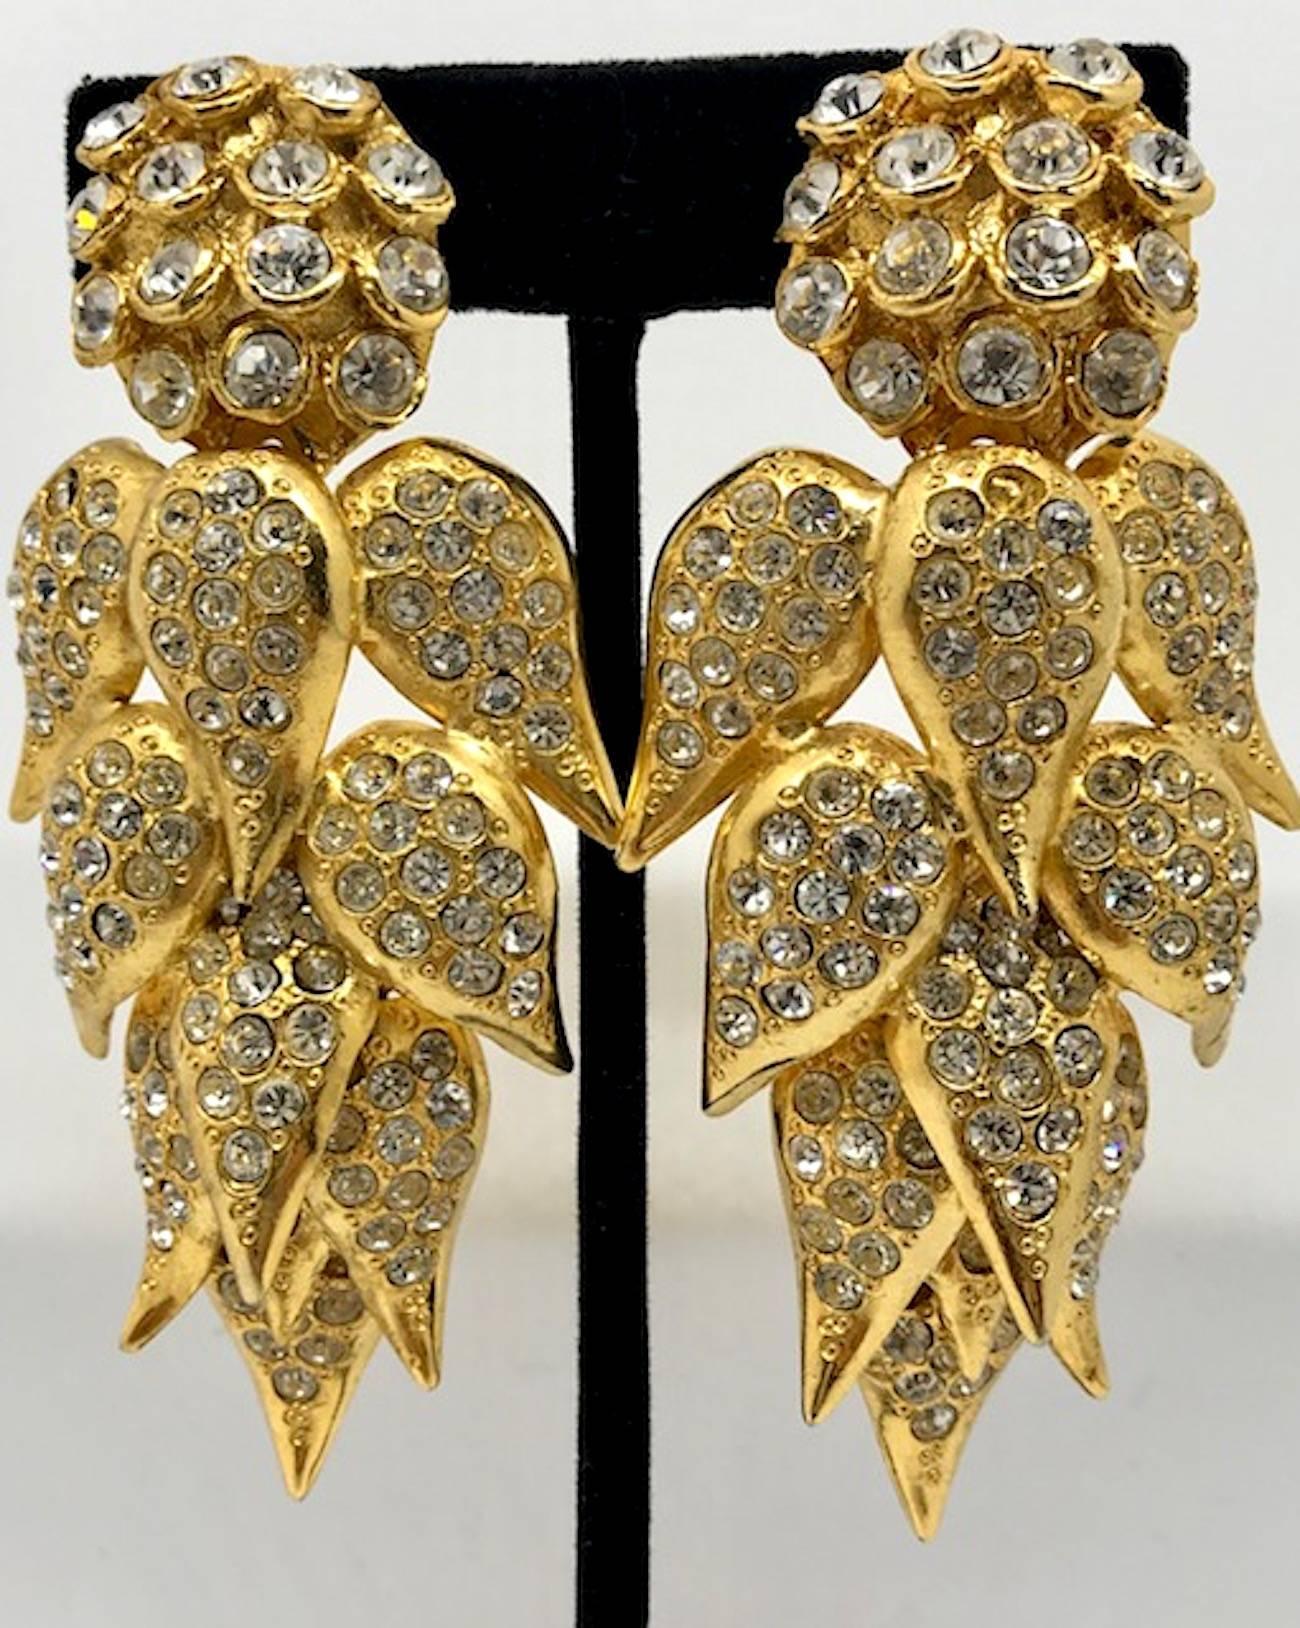 Women's De Liguoro large earrings from Actress Elsa Martinelli's personal collection